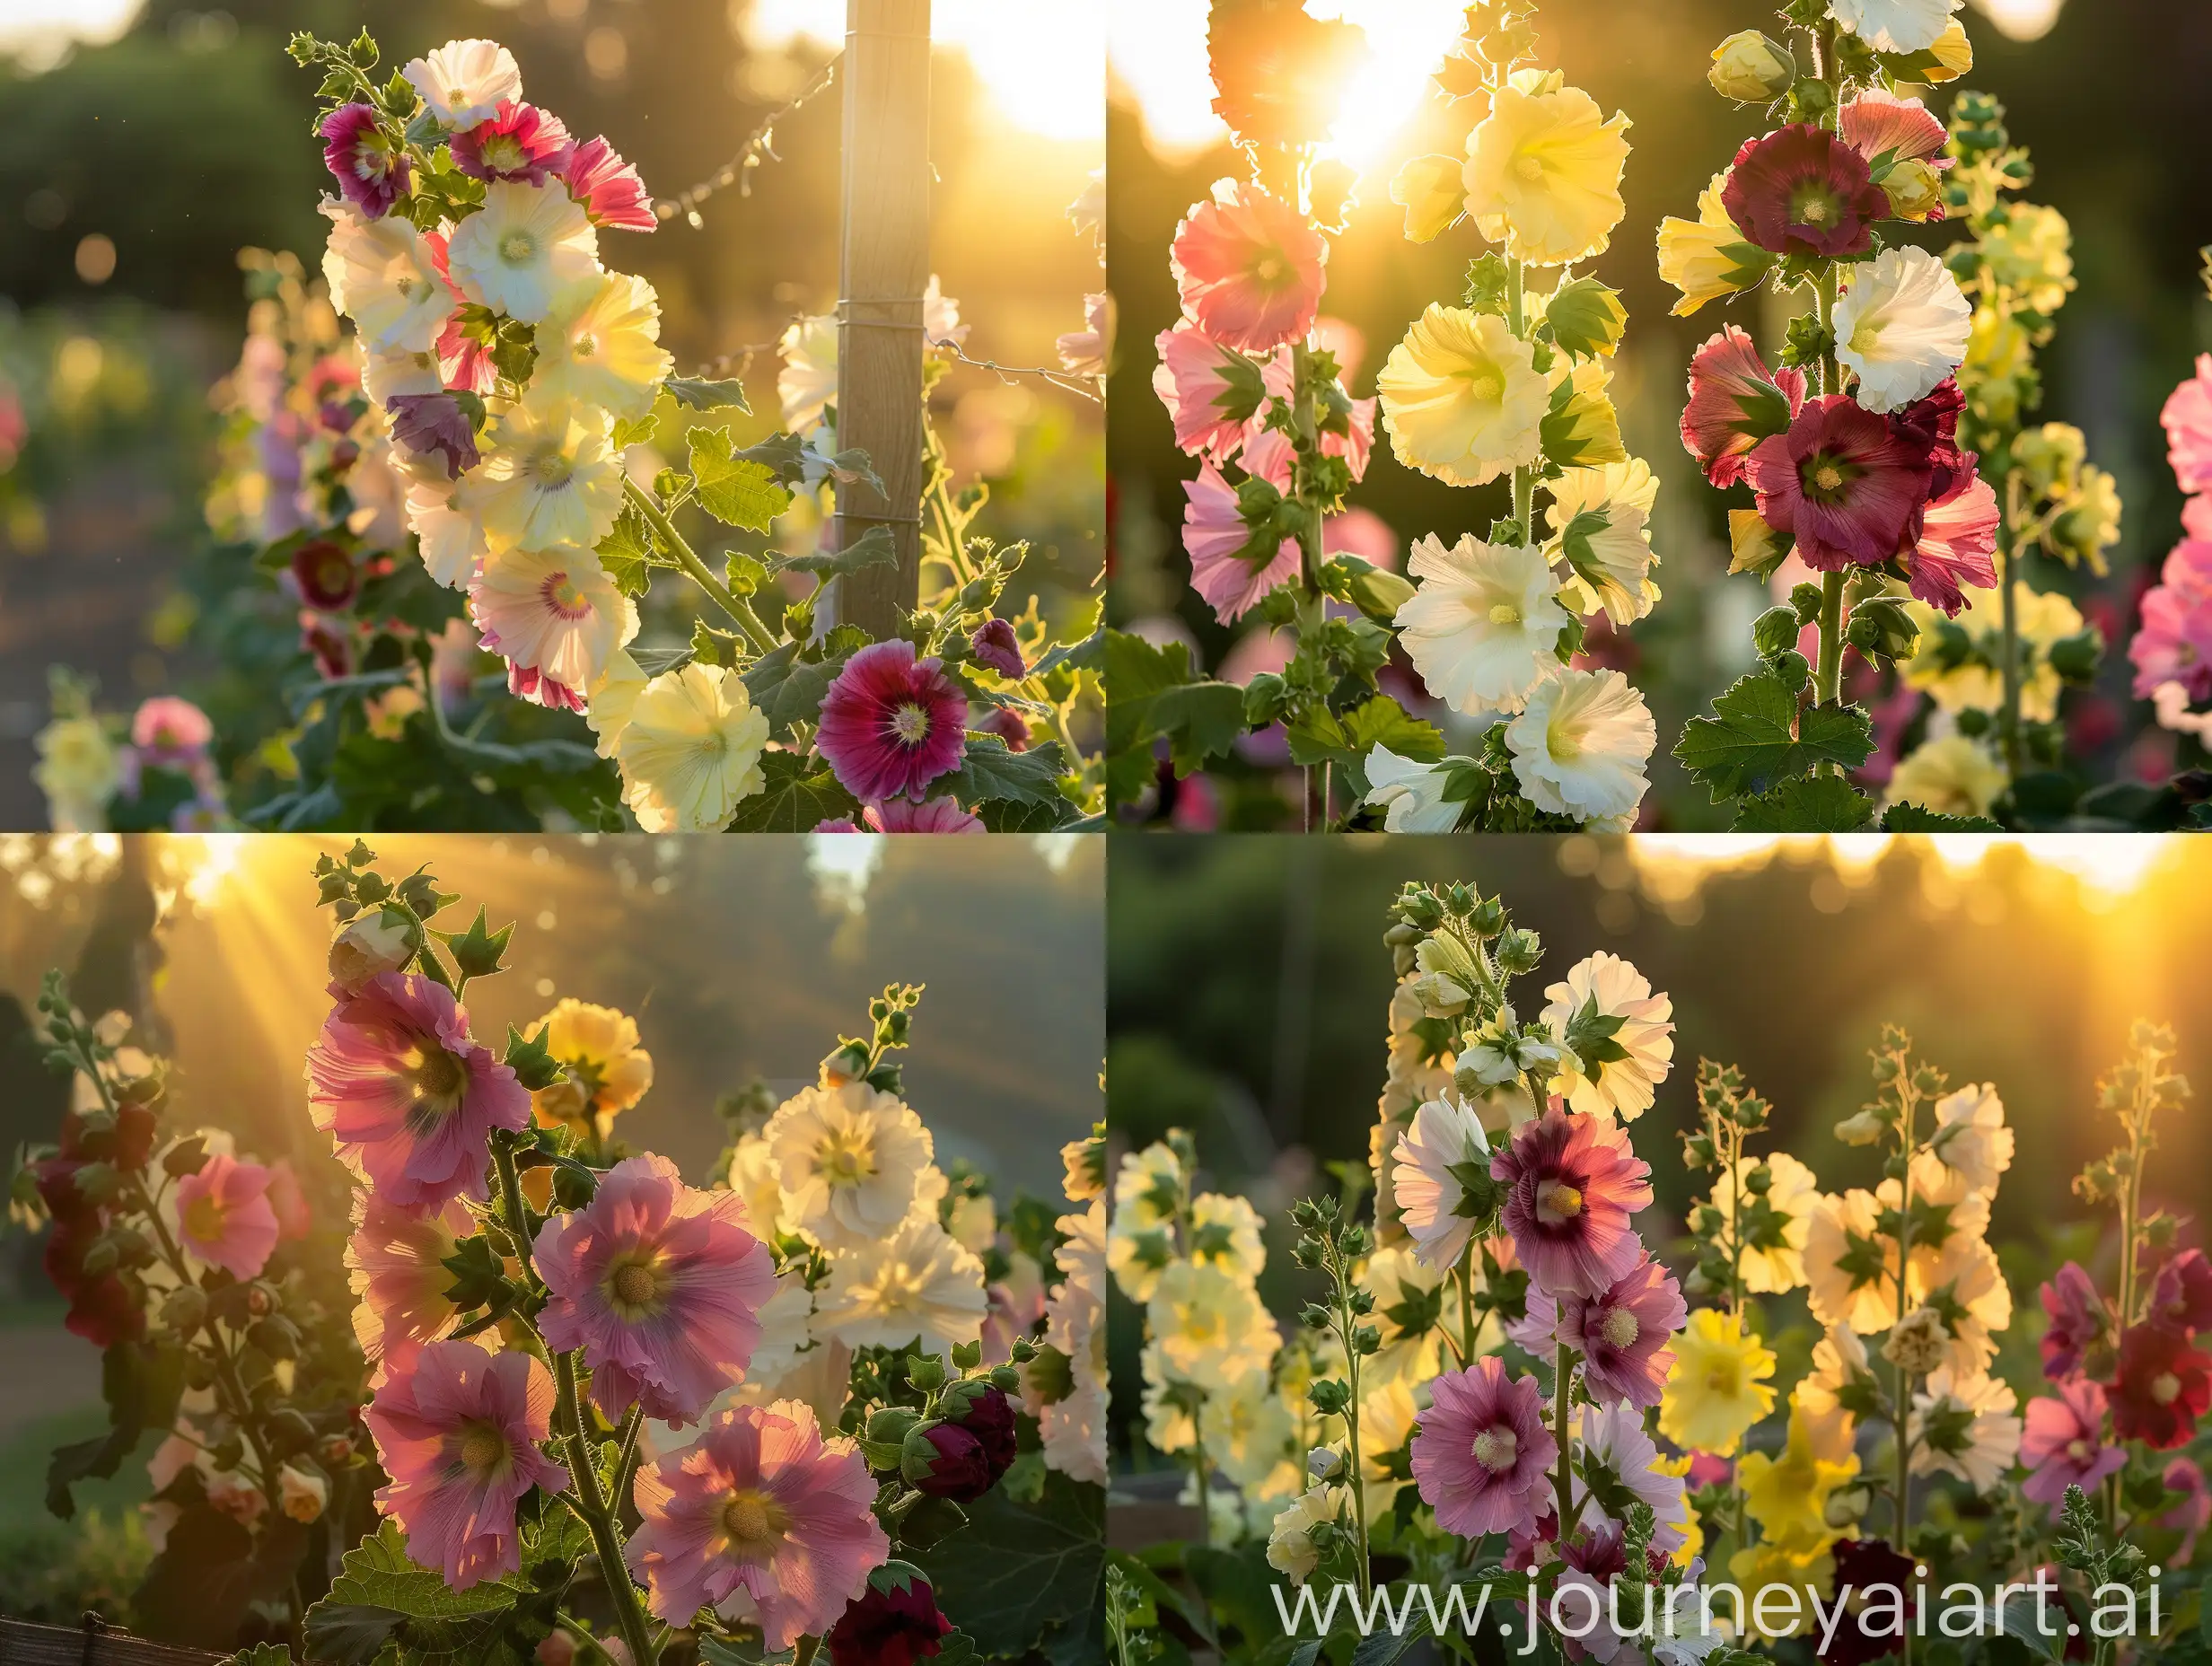 High detailed photo capturing a Hollyhock, Country Romance Mix. The sun, casting a warm, golden glow, bathes the scene in a serene ambiance, illuminating the intricate details of each element. The composition centers on a Hollyhock, Country Romance Mix. This is the old-fashioned perennial hollyhock that is so hard to find. Try it along a fence or plant with verbascum for a special look. A blend of rose, white, maroon, yellow and pink, large 3-5" single flowers are produced abundantly on stalks 5-7 ft. hi. The image evokes a sense of tranquility and natural beauty, inviting viewers to immerse themselves in the splendor of the landscape. --ar 16:9 